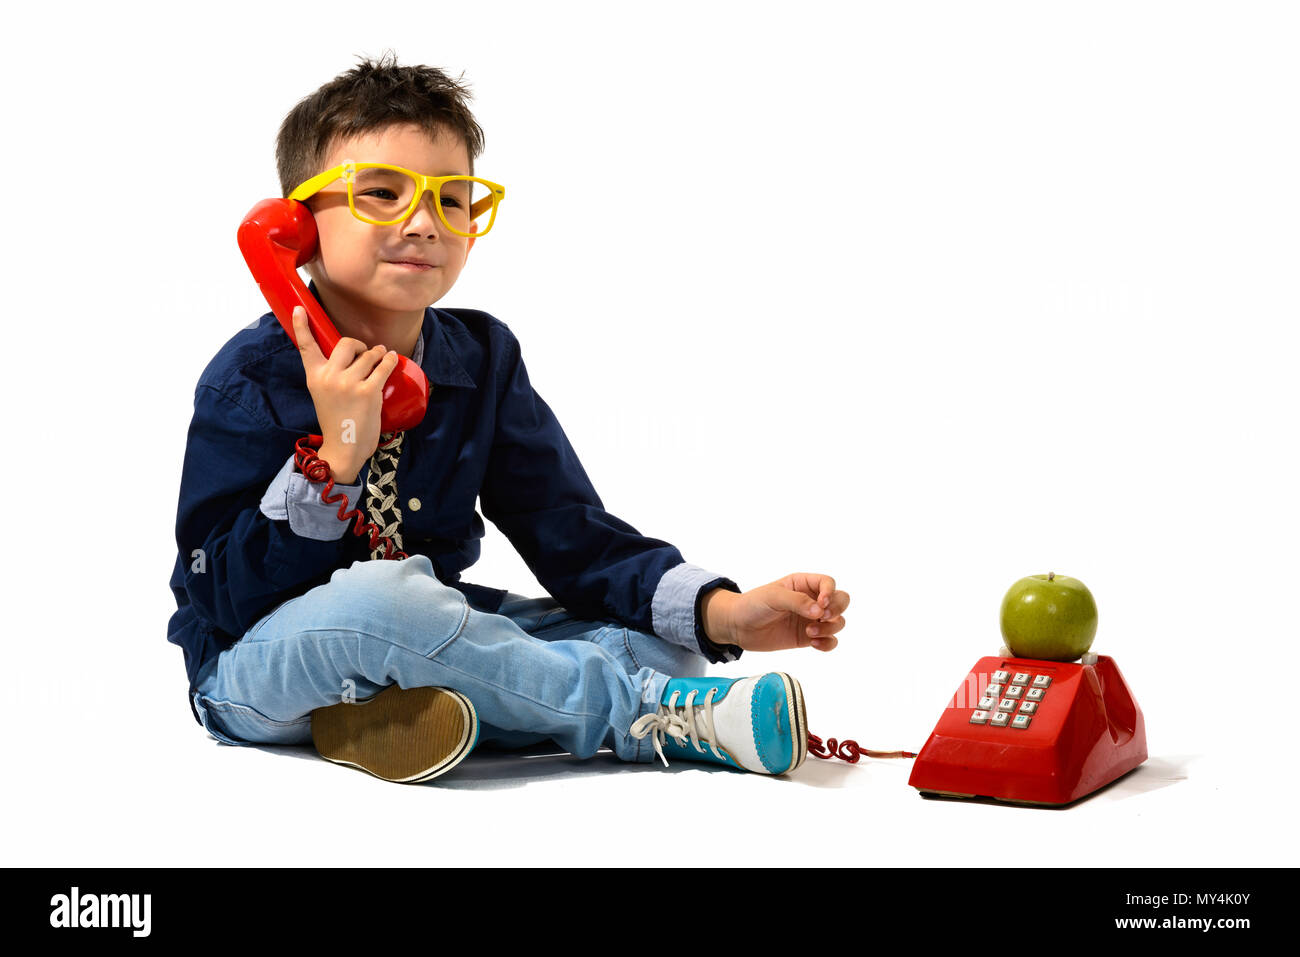 Portrait of cute boy talking on old telephone Banque D'Images